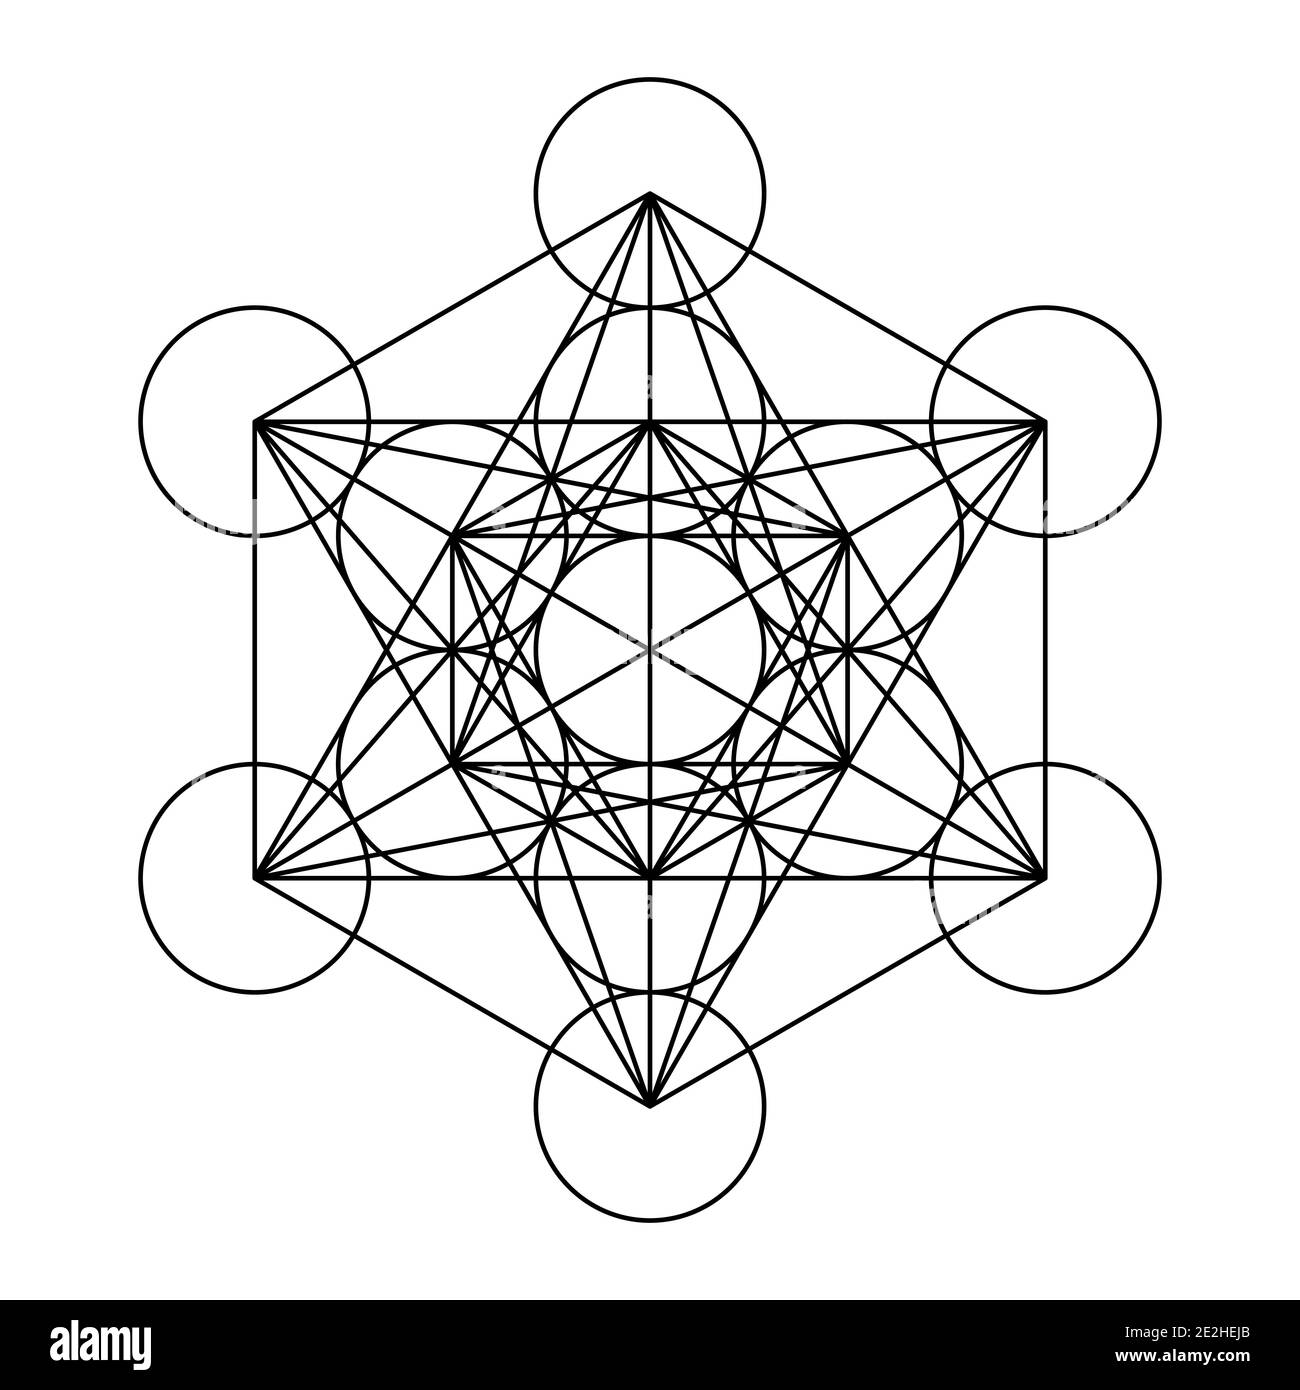 Metatrons Cube, a mystical symbol, derived from the Flower of Life. All thirteen circles are connected with straight lines. Sacred Geometry. Stock Photo